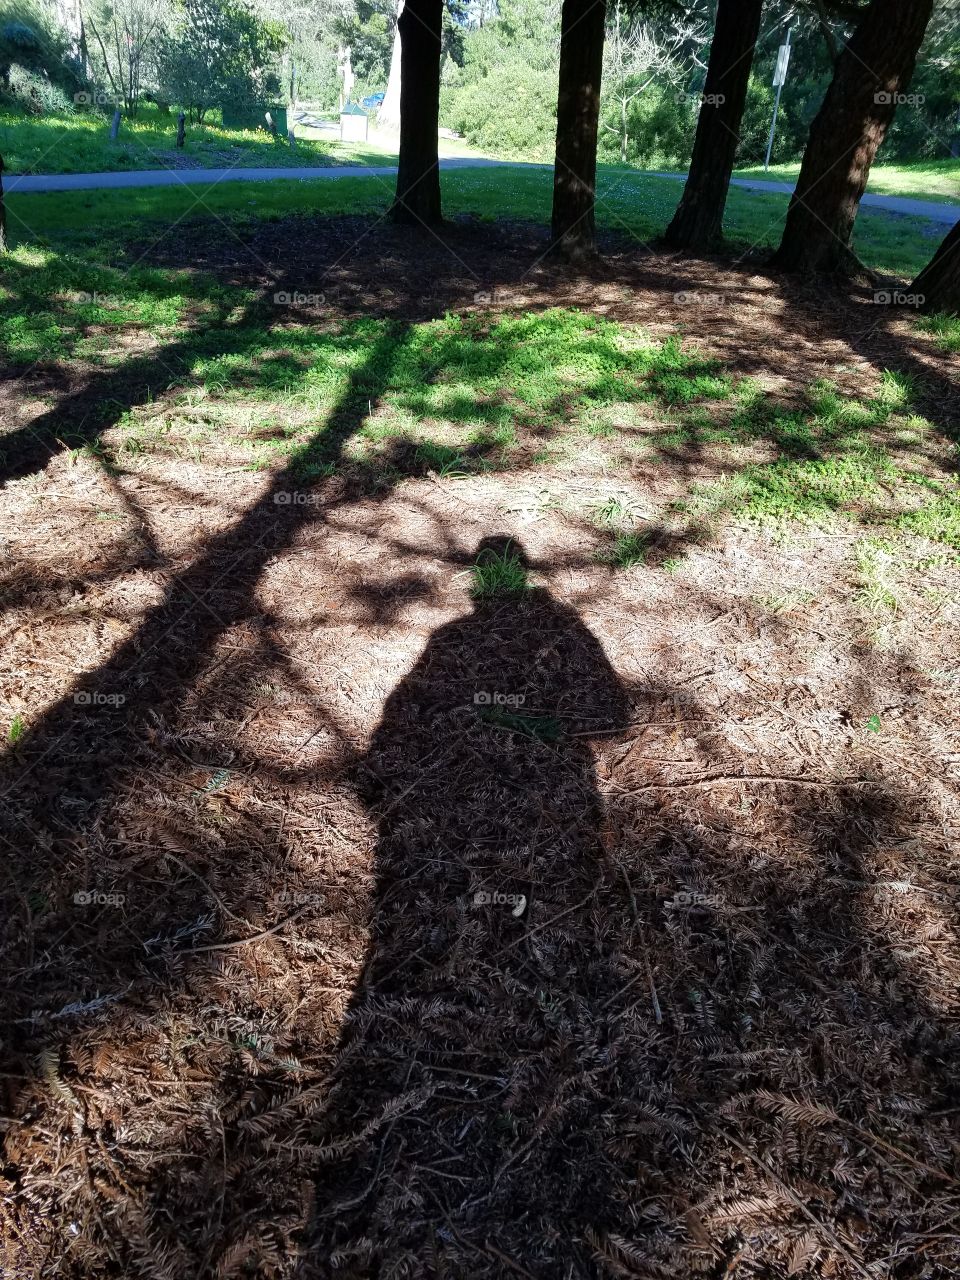 Shadows in the Woods